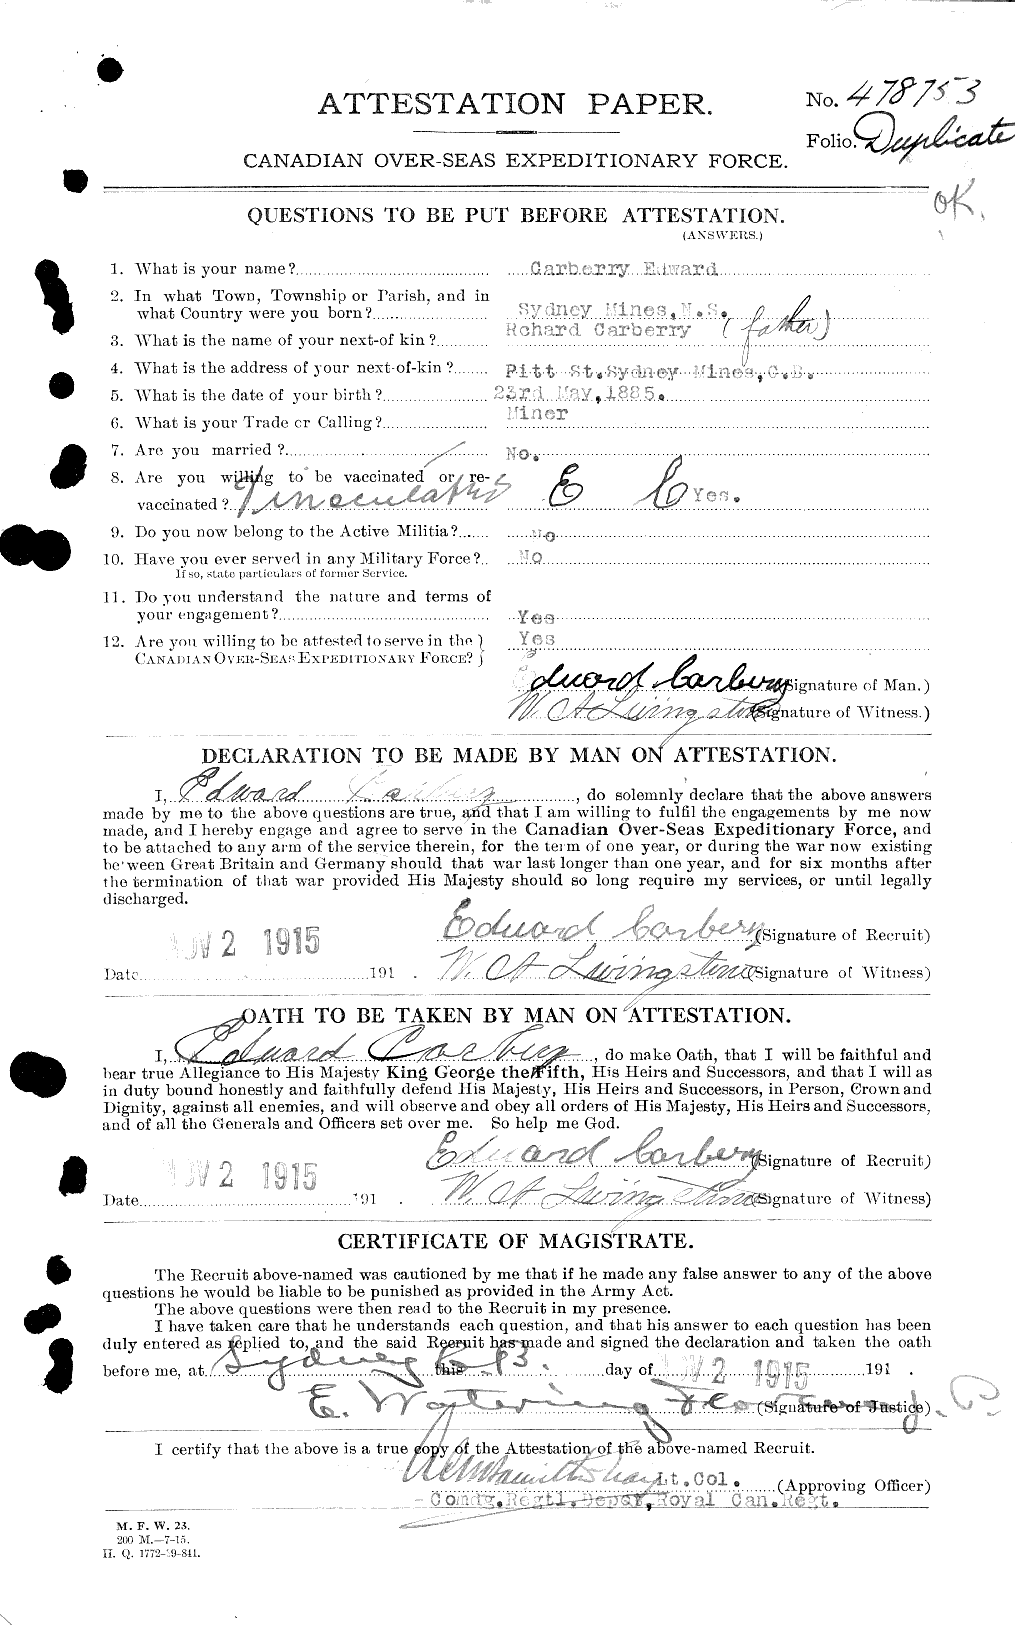 Personnel Records of the First World War - CEF 009208a